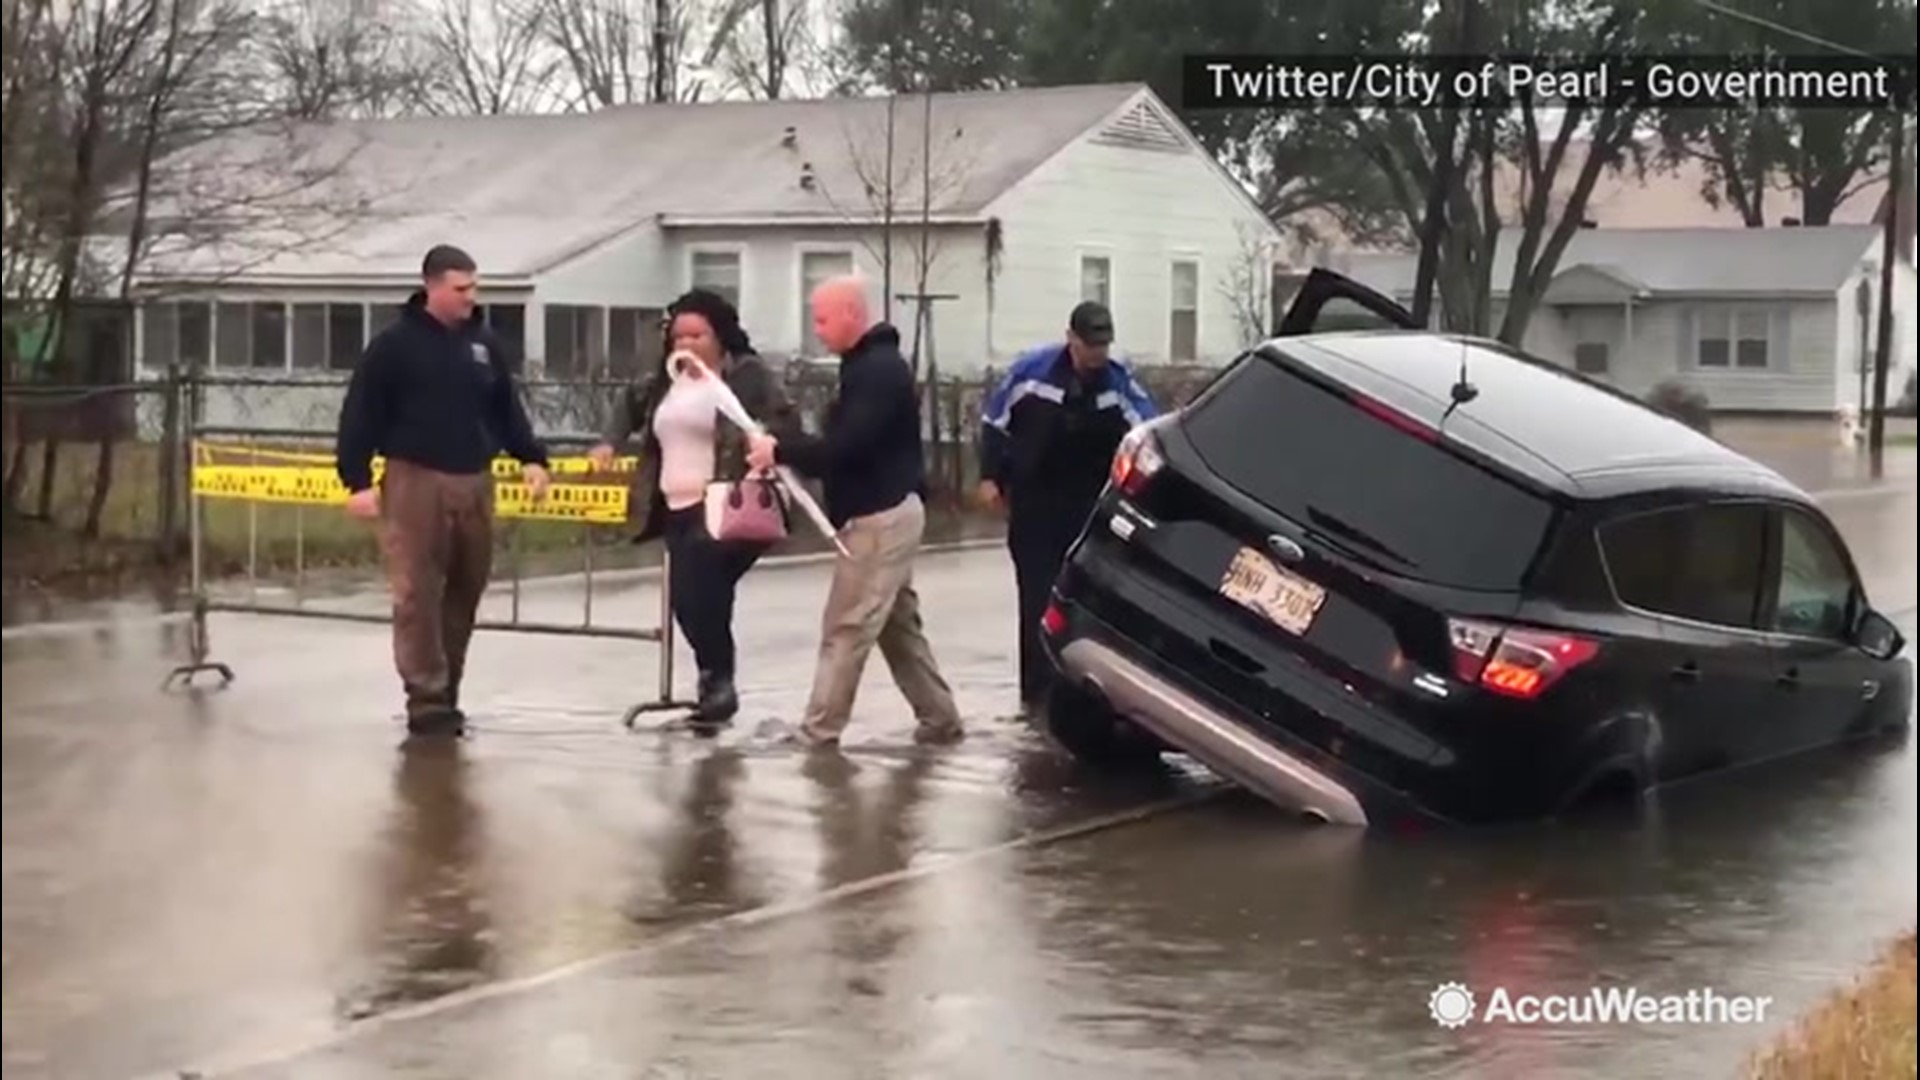 This driver in Pearl, Mississippi, found herself stuck in floodwaters after driving around barricades on Jan. 14. Fortunately, she was not hurt.